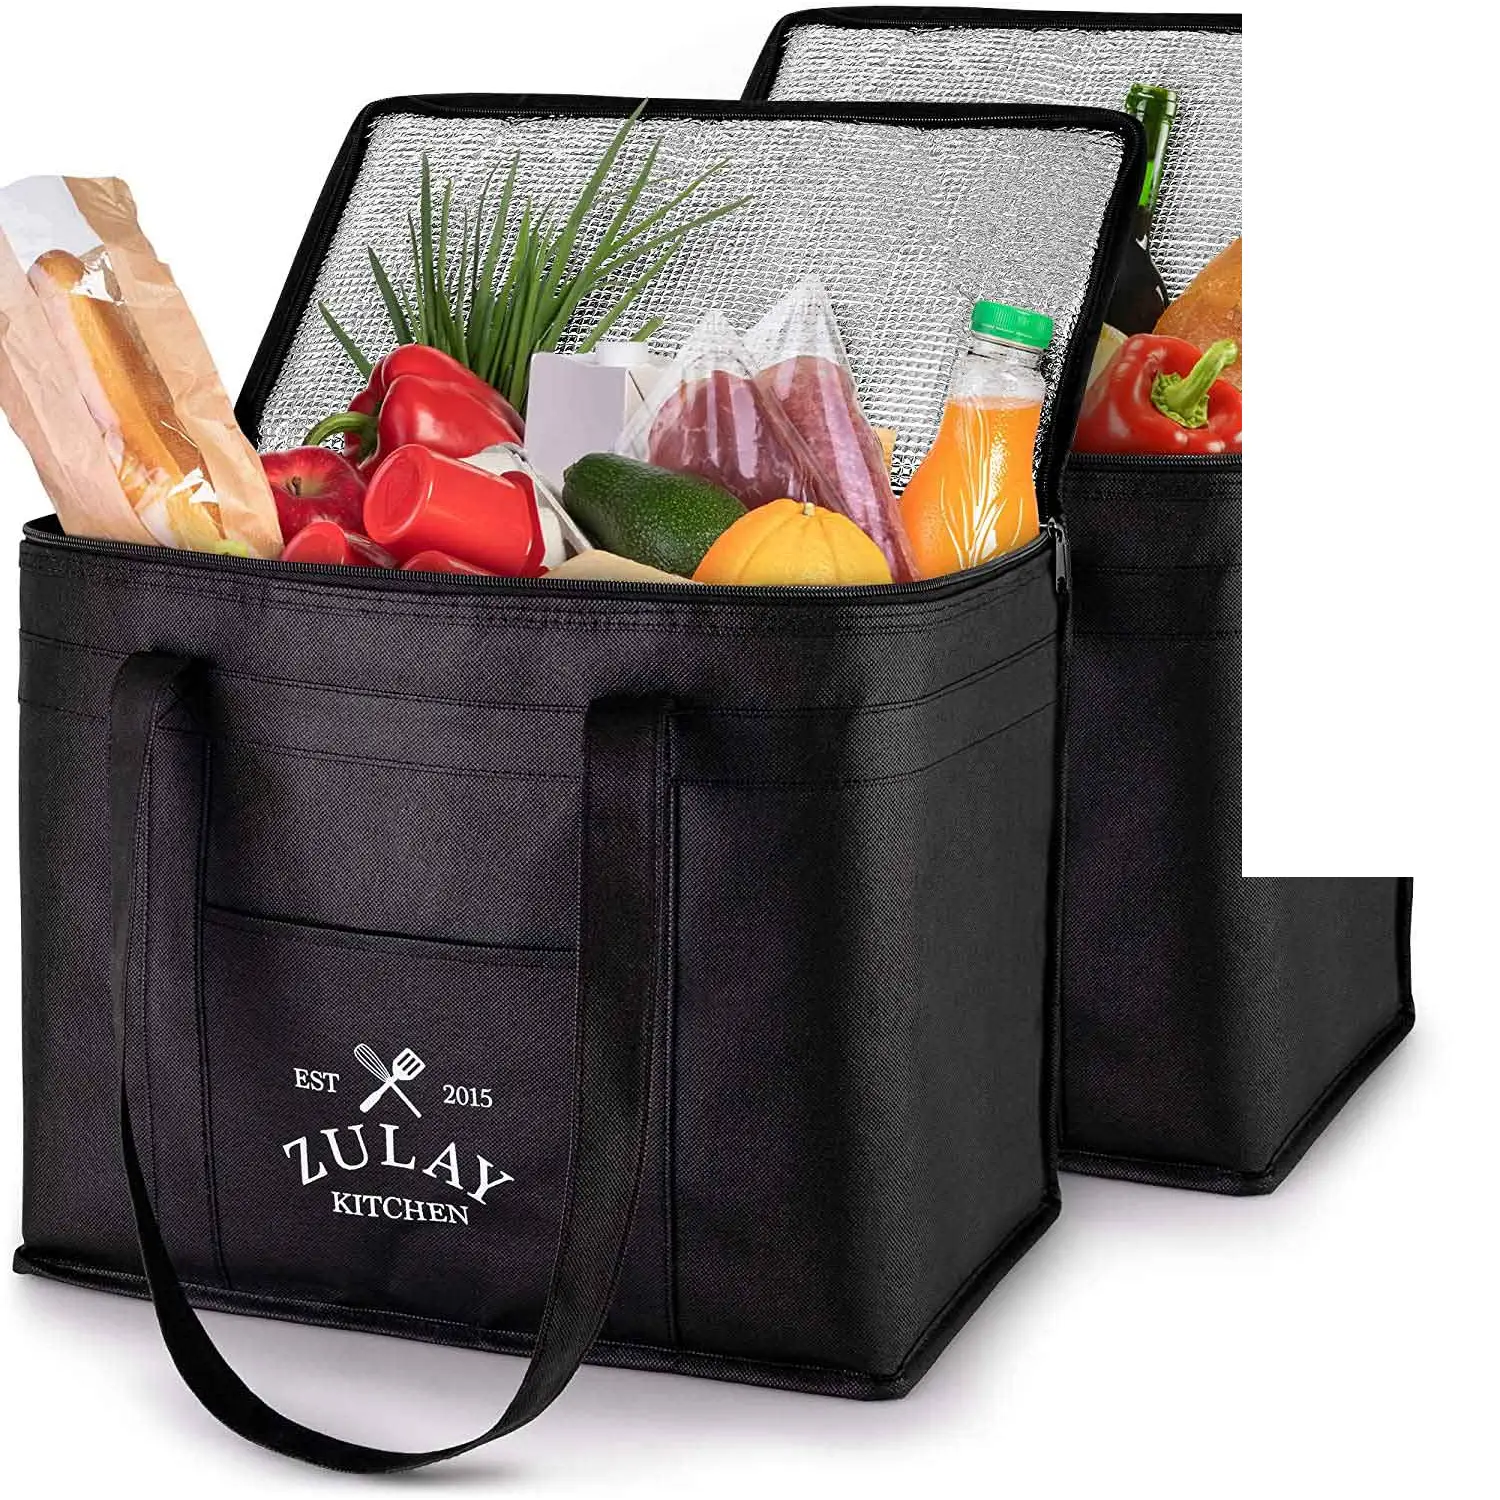 Zulay 2 Pack Large Insulated Bag - Reusable Heavy Duty Insulated Food Delivery Bag With Longer Handl